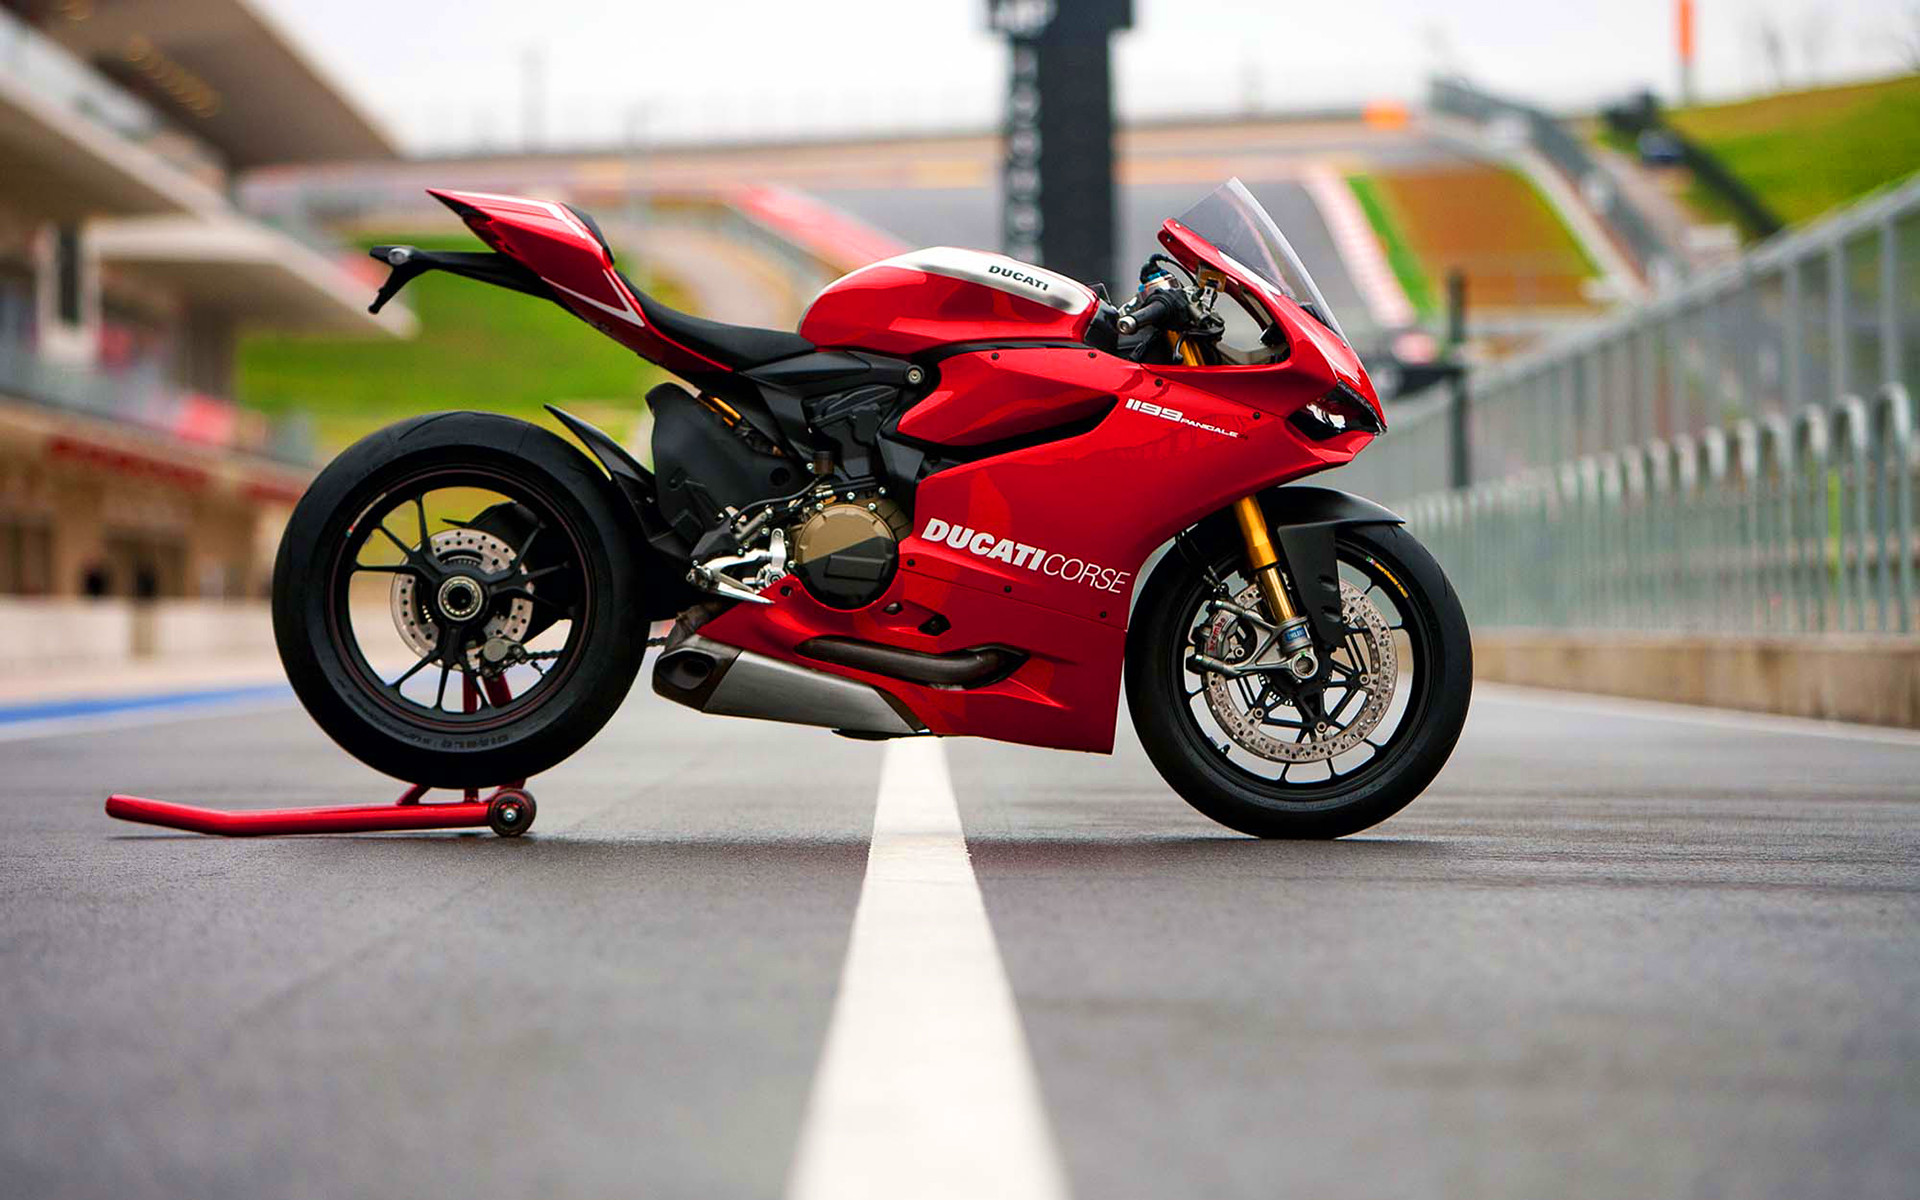 1920x1200 Ducati 1199 Panigale S HD Wallpapers : Find best latest Ducati 1199  Panigale S HD Wallpapers